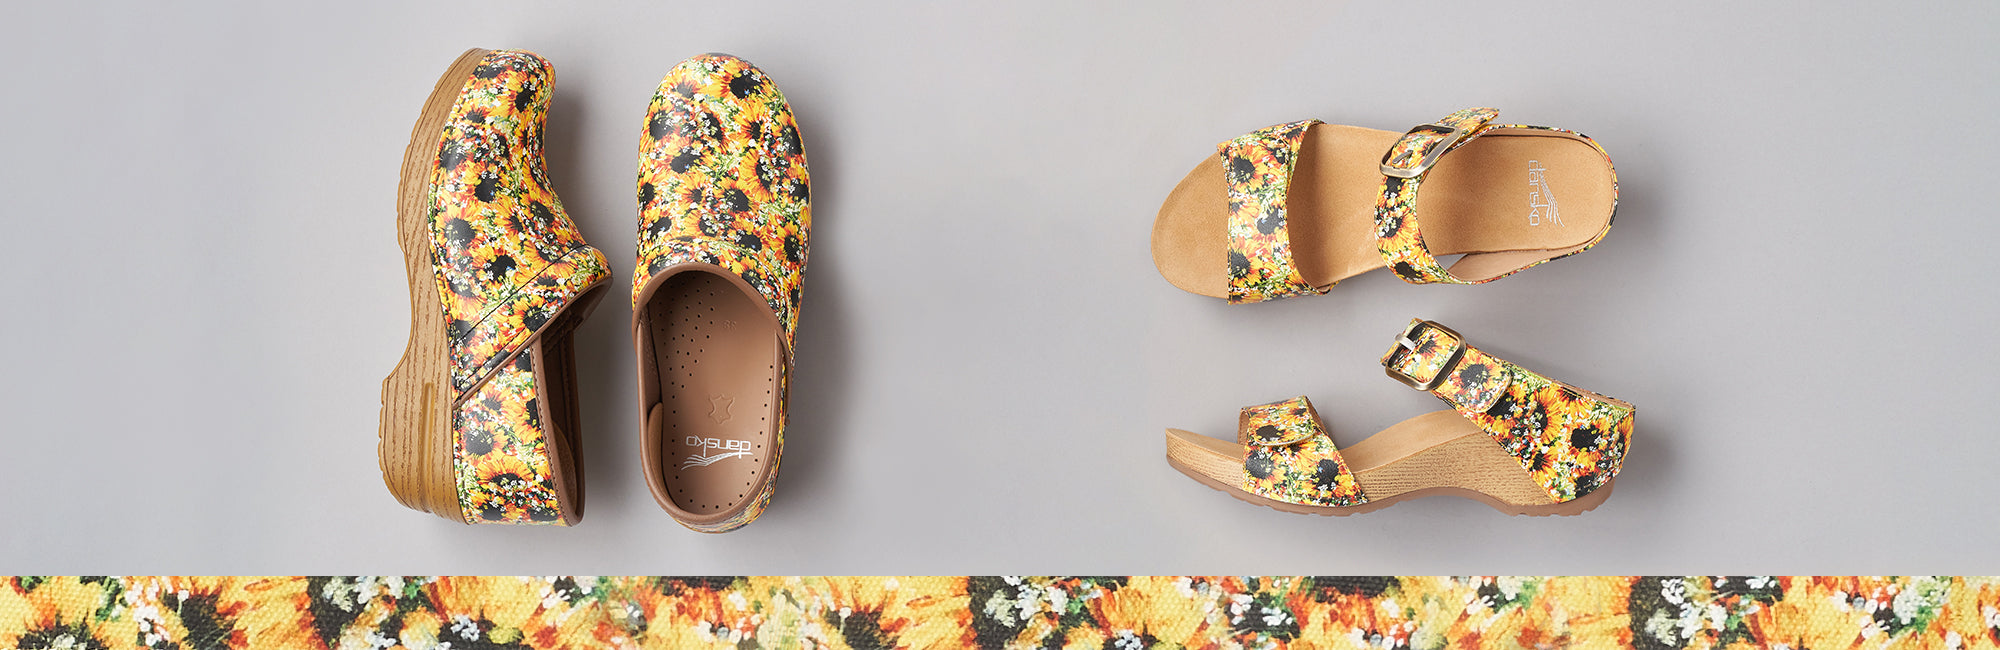 Sunflower printed clogs and two-strap sandals with a closeup of the sunflower pattern.